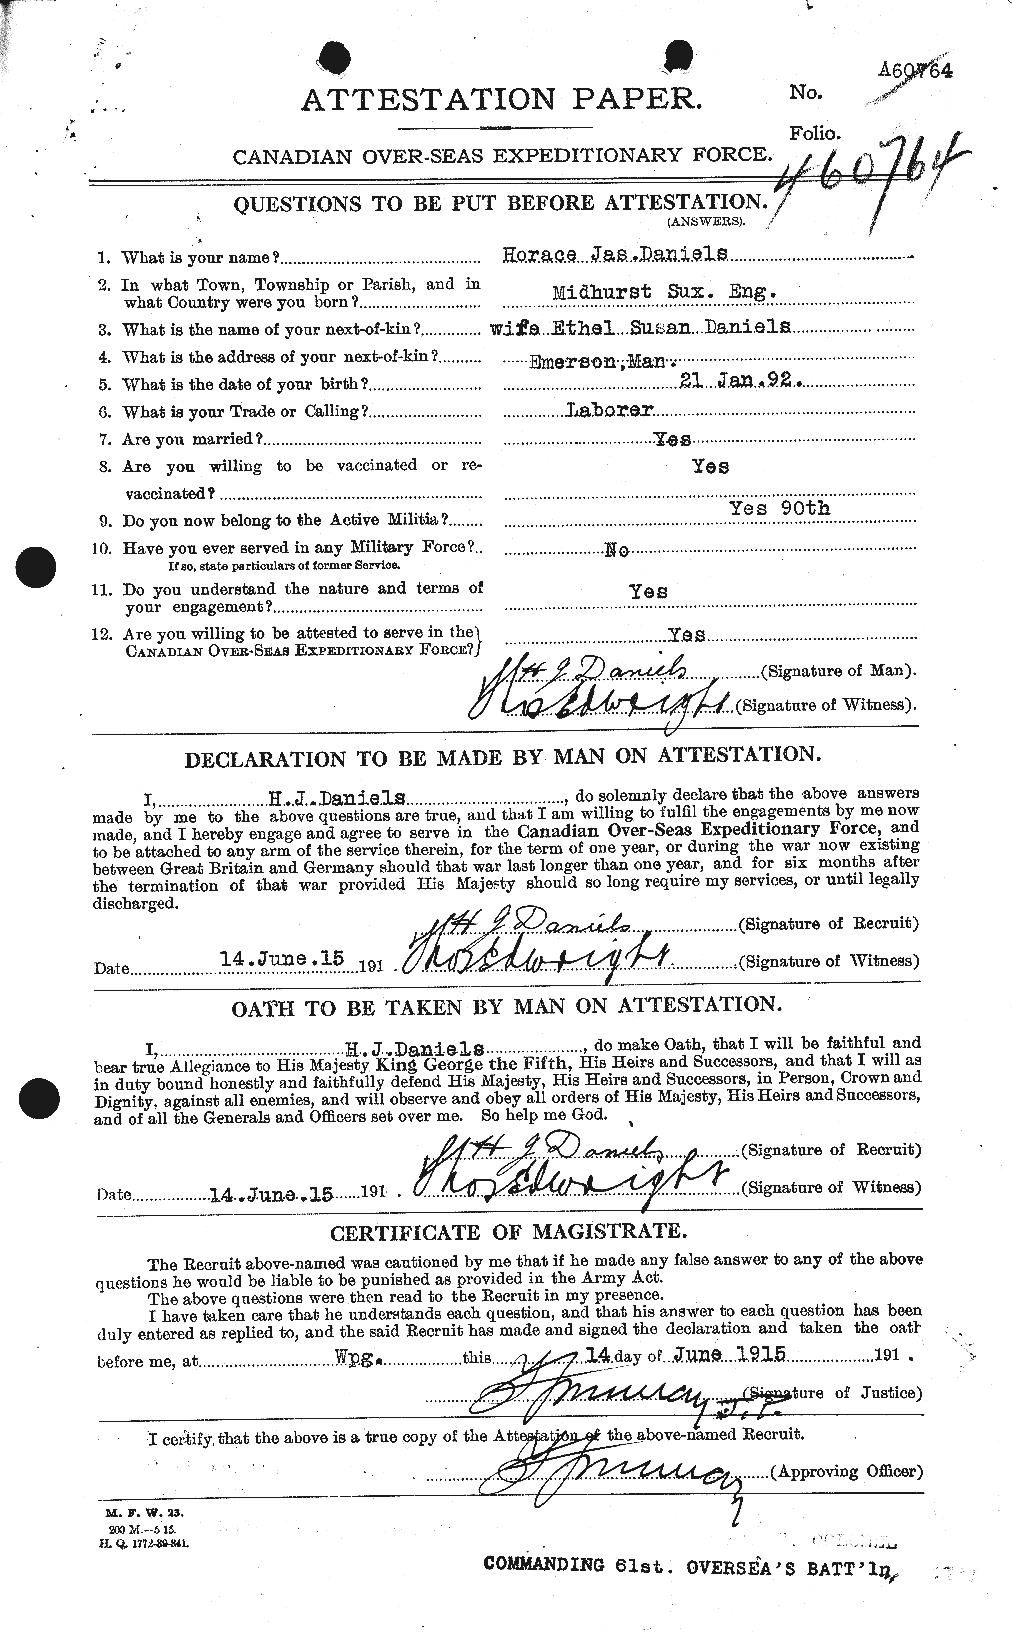 Personnel Records of the First World War - CEF 279621a